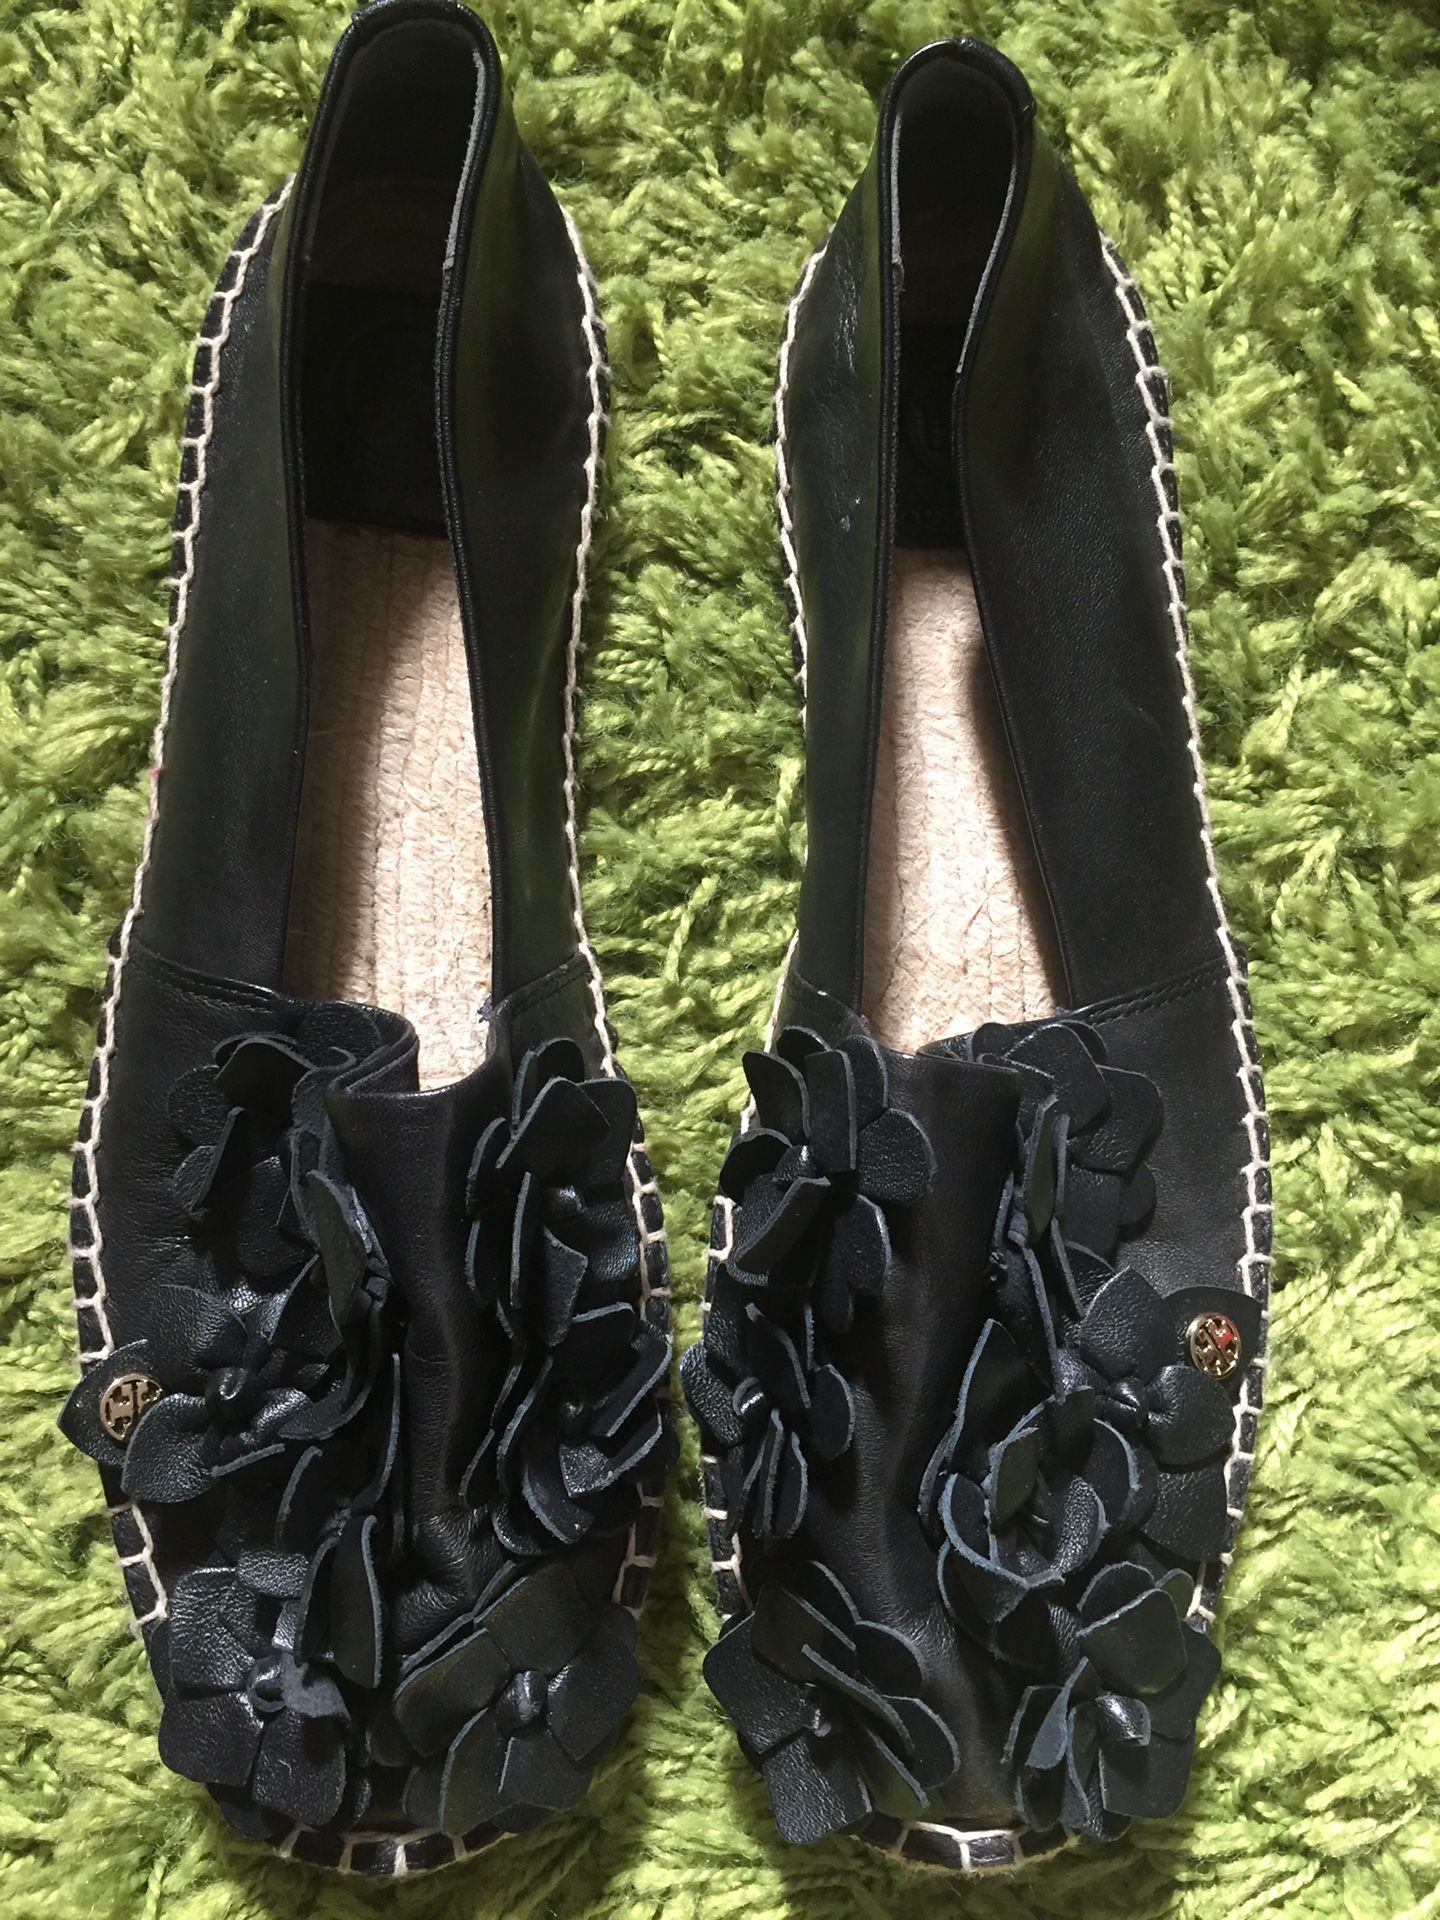 Tory Burch flats leather flowers shoes